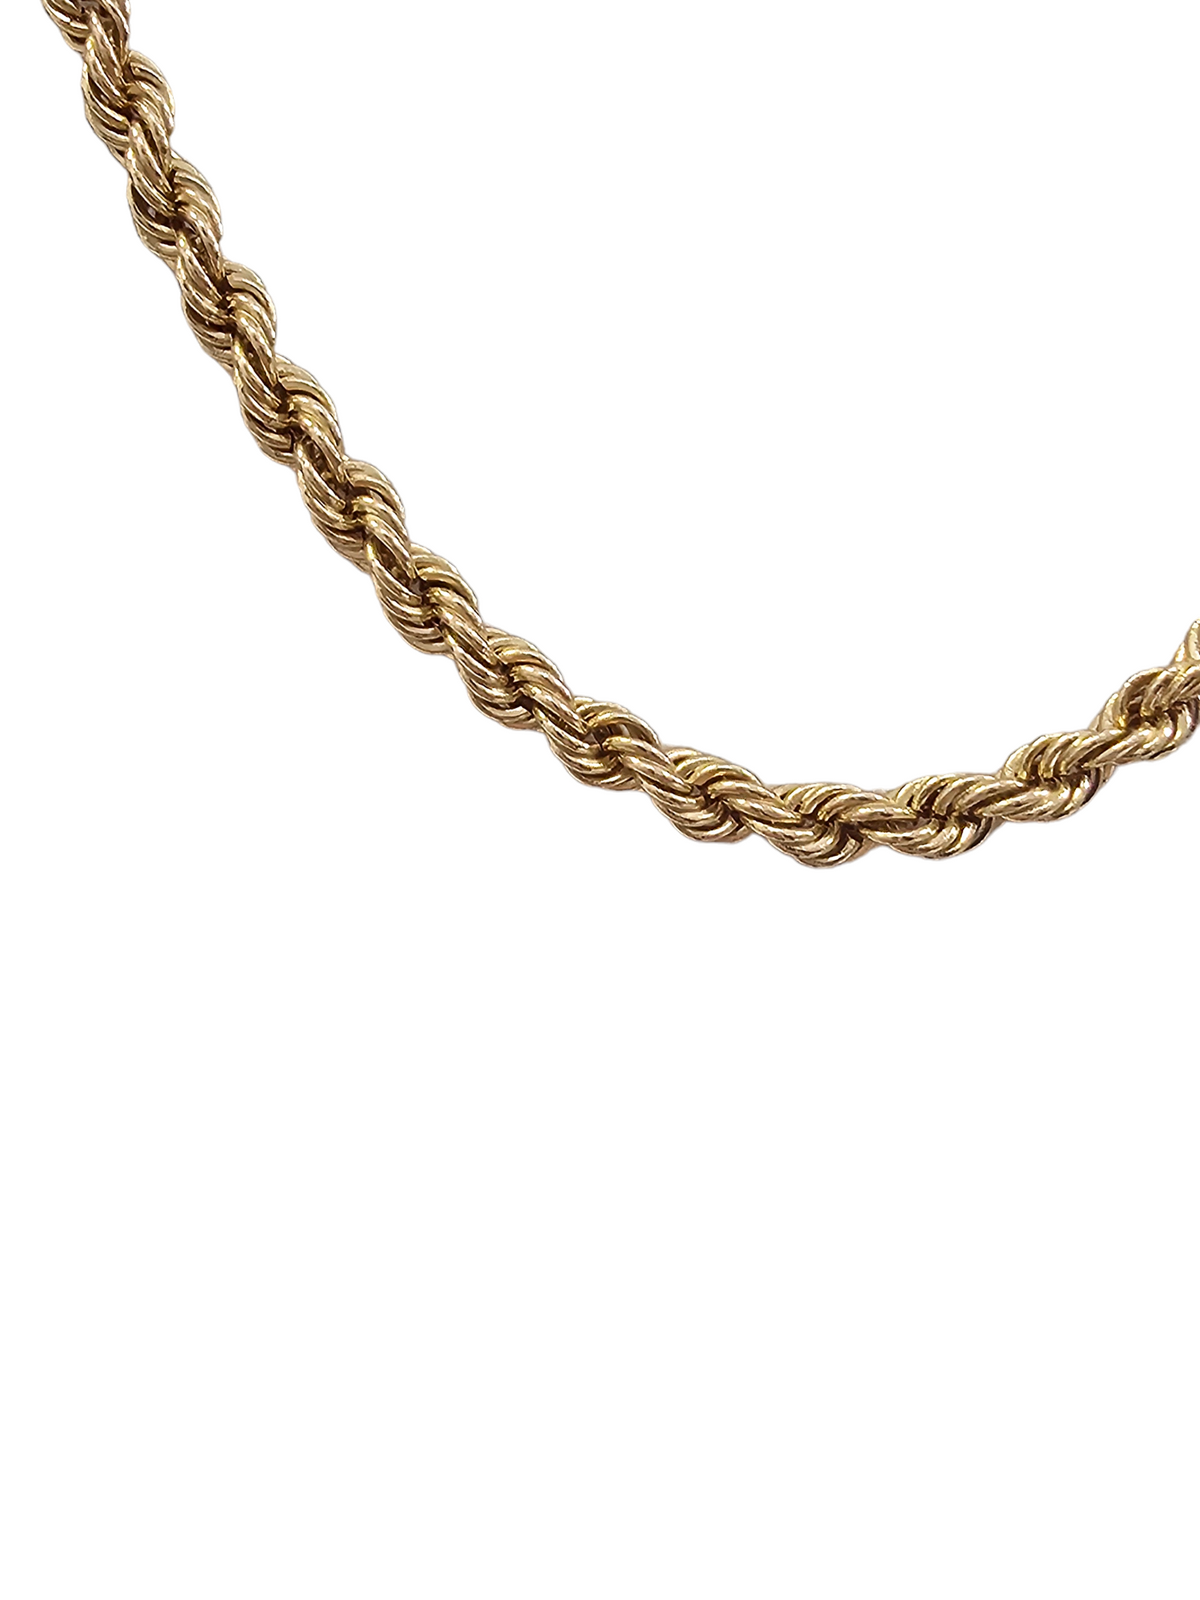 Rope chain  3.7mm made in solid 14-karat yellow gold 25 inches